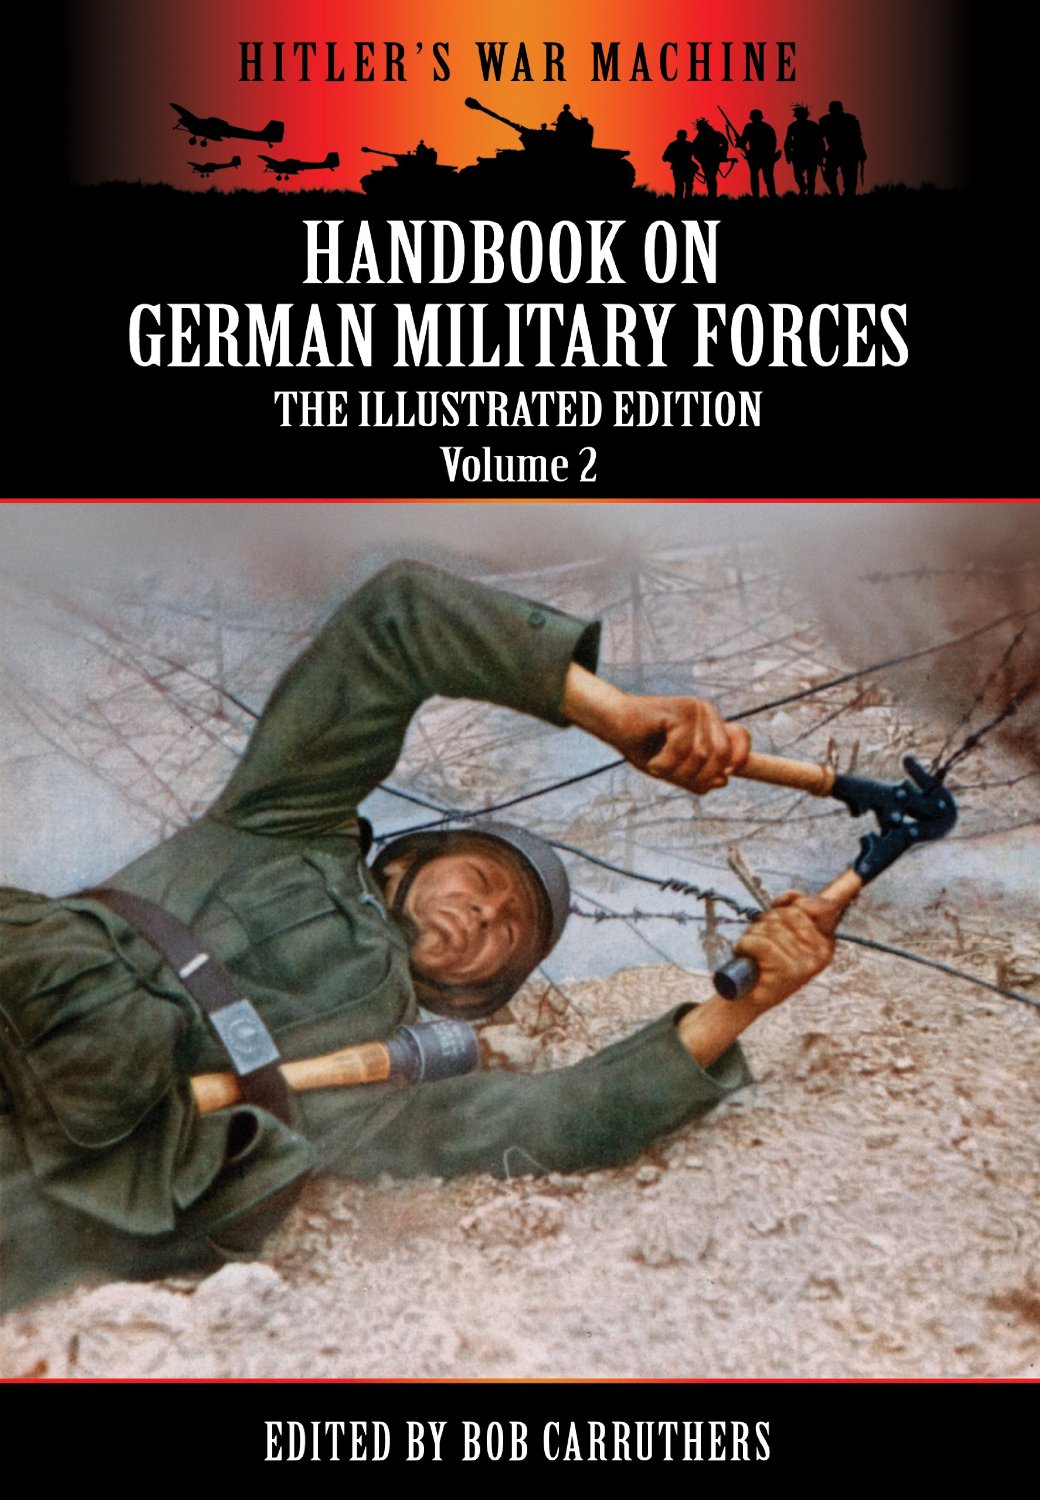 Handbook On German Military Forces – The Illustrated Edition – Volume 2 (Hitler’S War Machine)